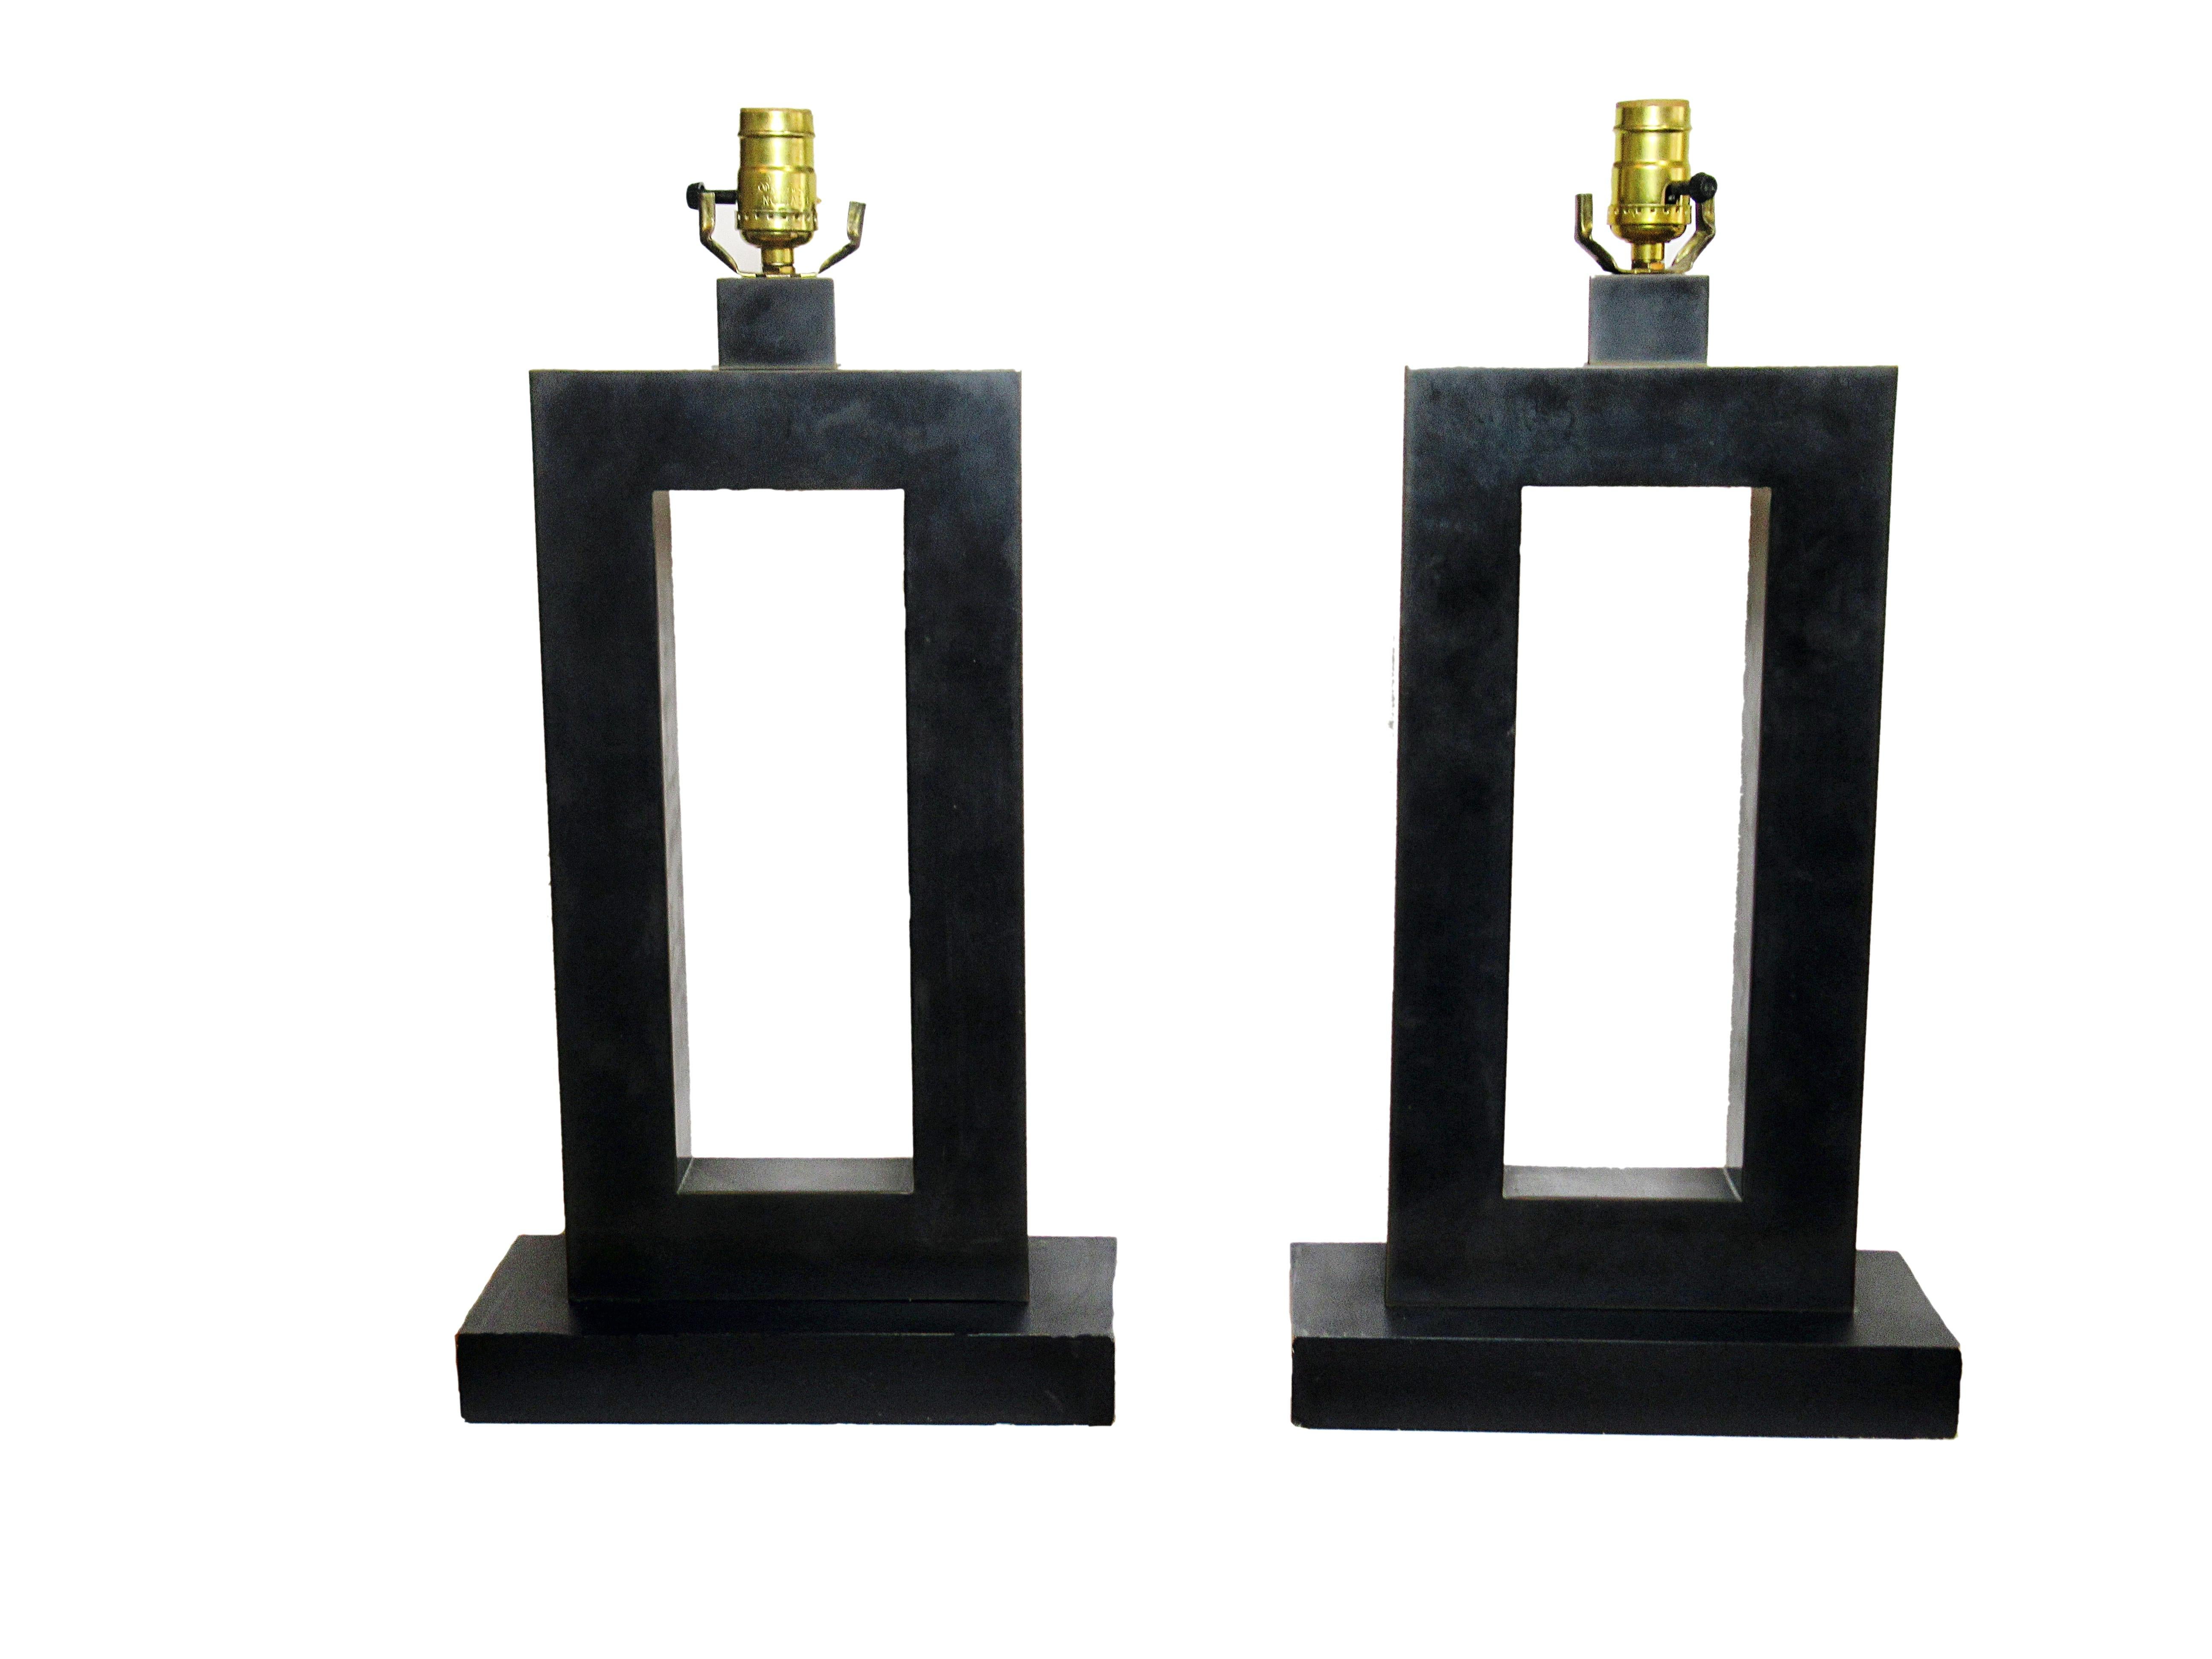 Pair of modern table lamps, Laurel Lamp Company, rubbed bronze finish, restored and rewired.